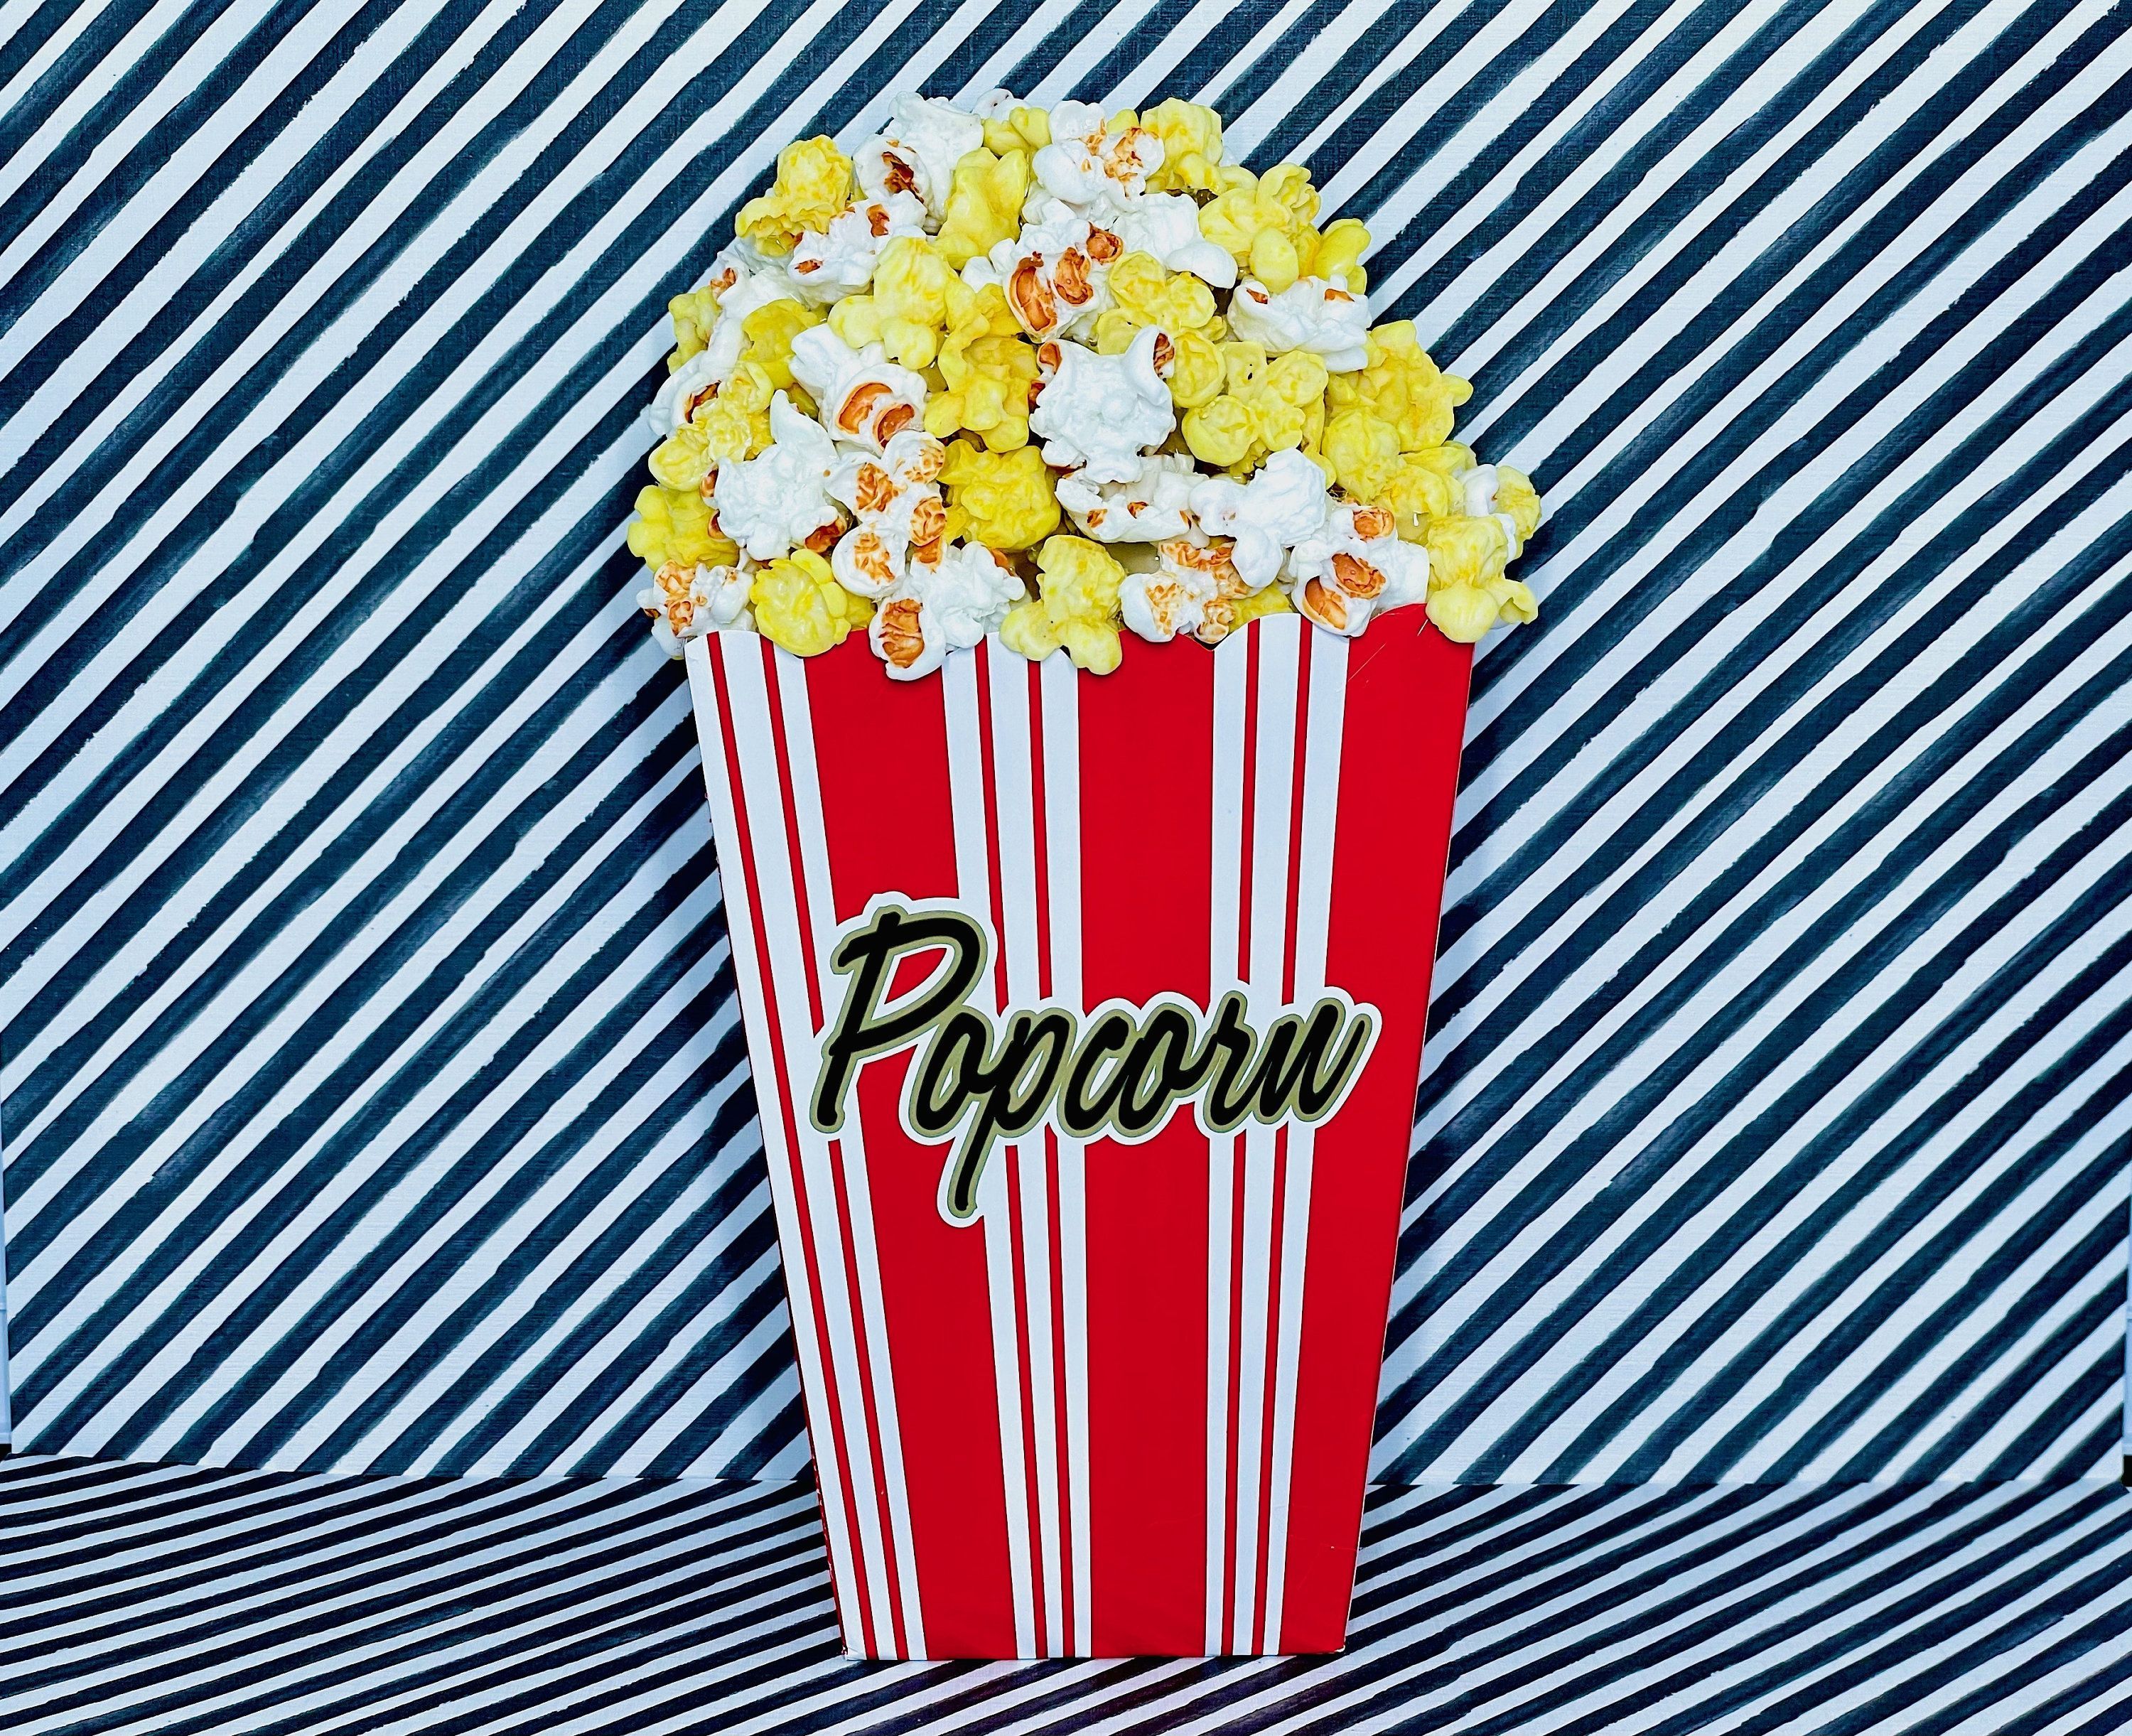 A large red and white popcorn box filled with popcorn on a blue and white striped background. - Popcorn